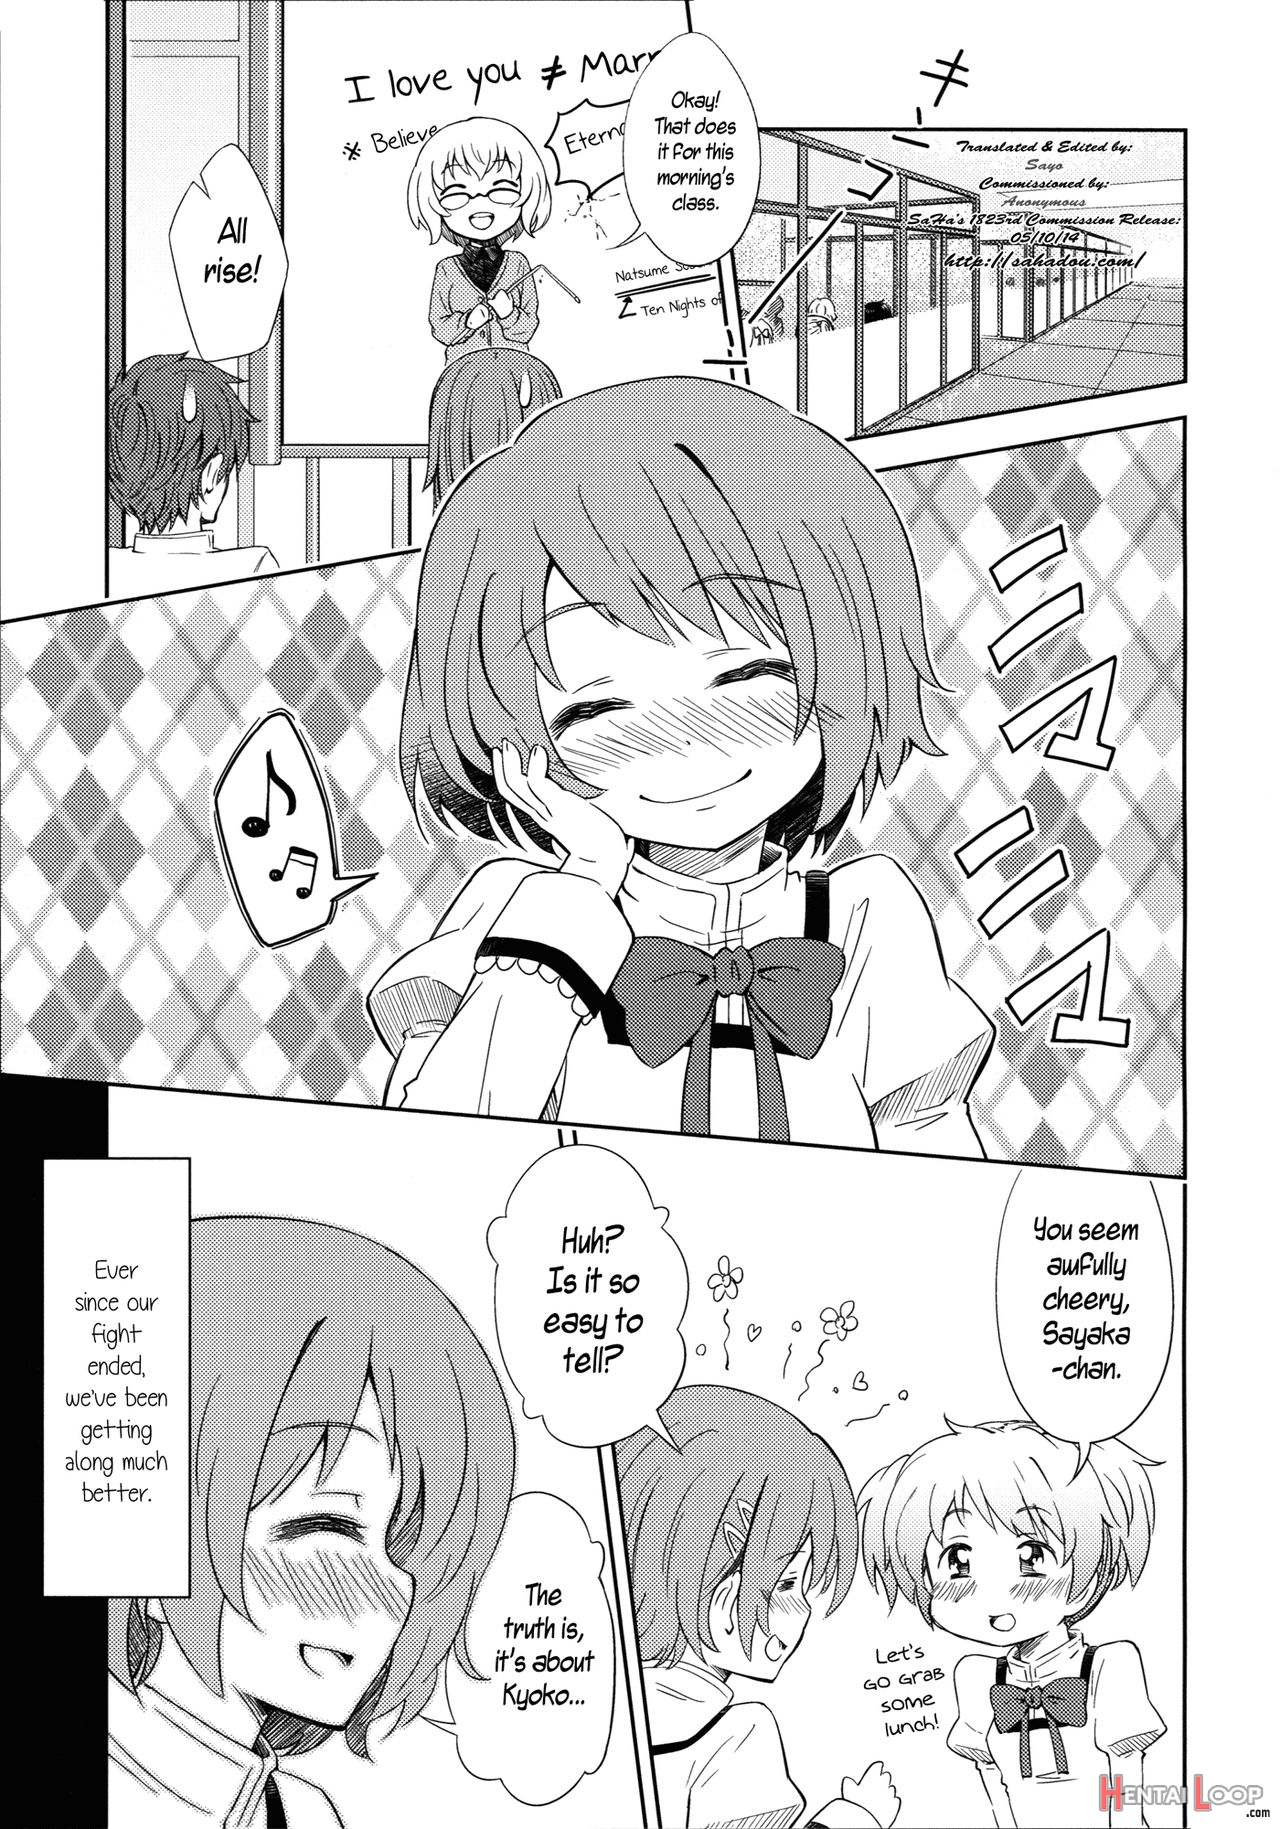 Lovely Girls’ Lily Vol.5 page 3